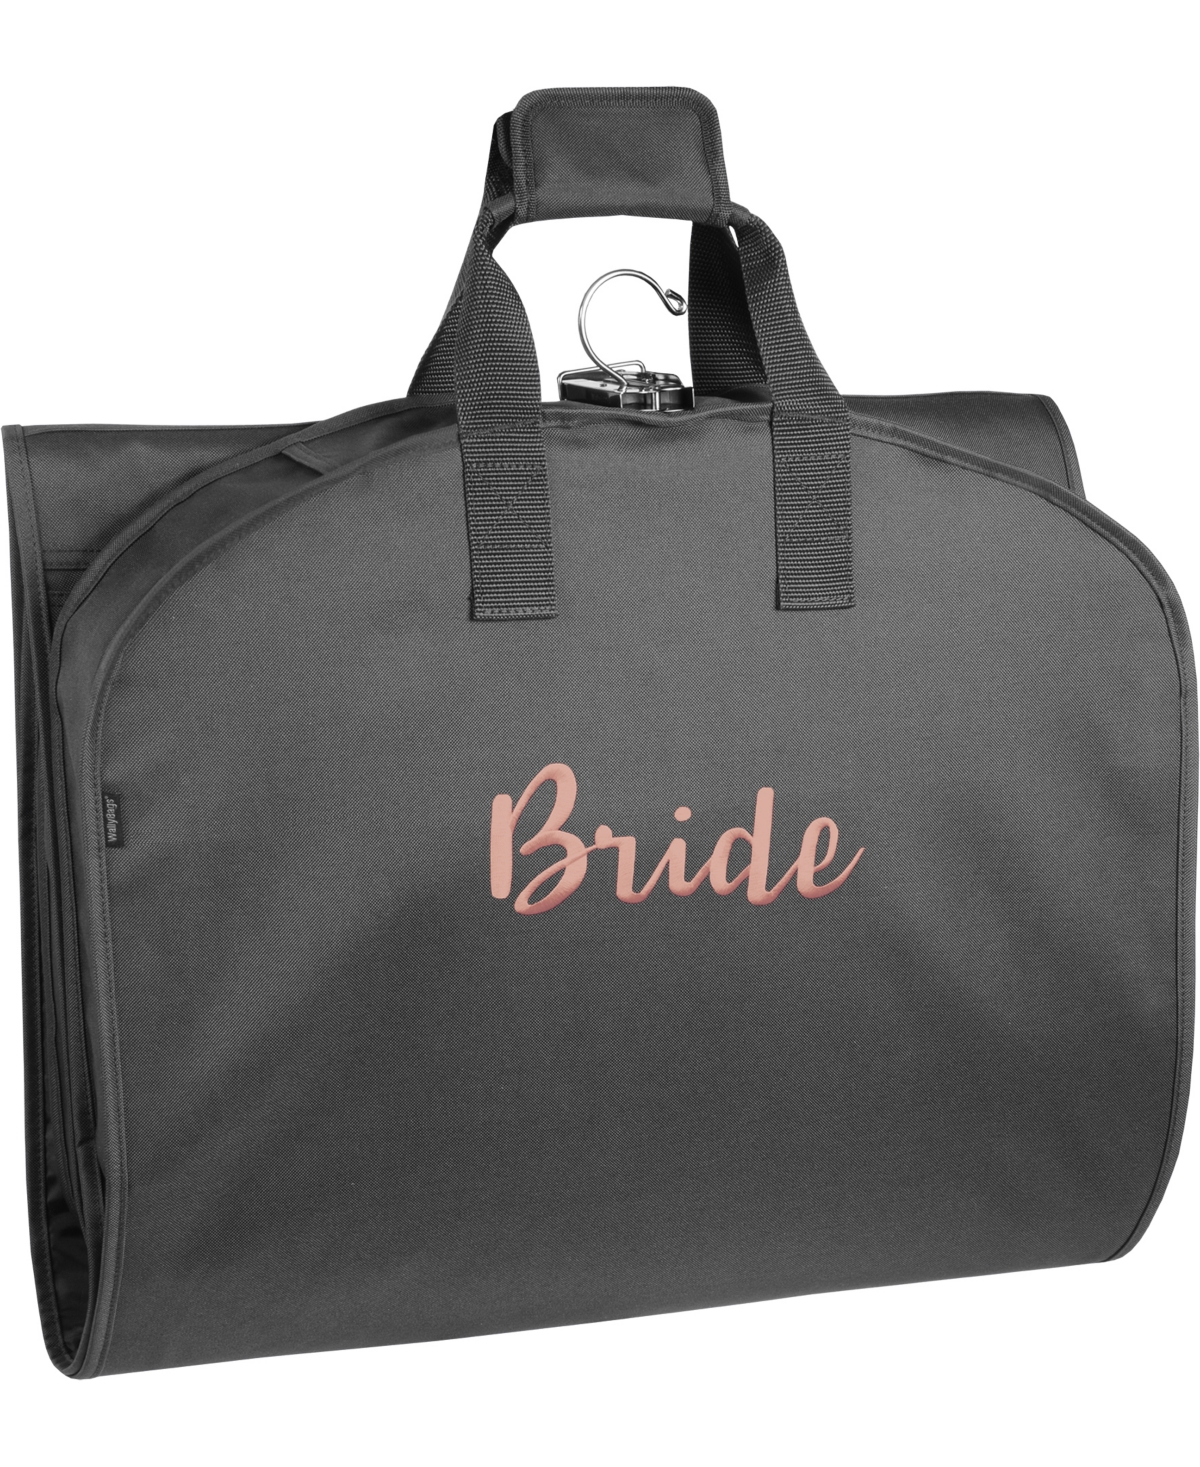 Wallybags 60" Premium Tri-fold Travel Garment Bag With Pocket And Bride Embroidery In Black - B Rose